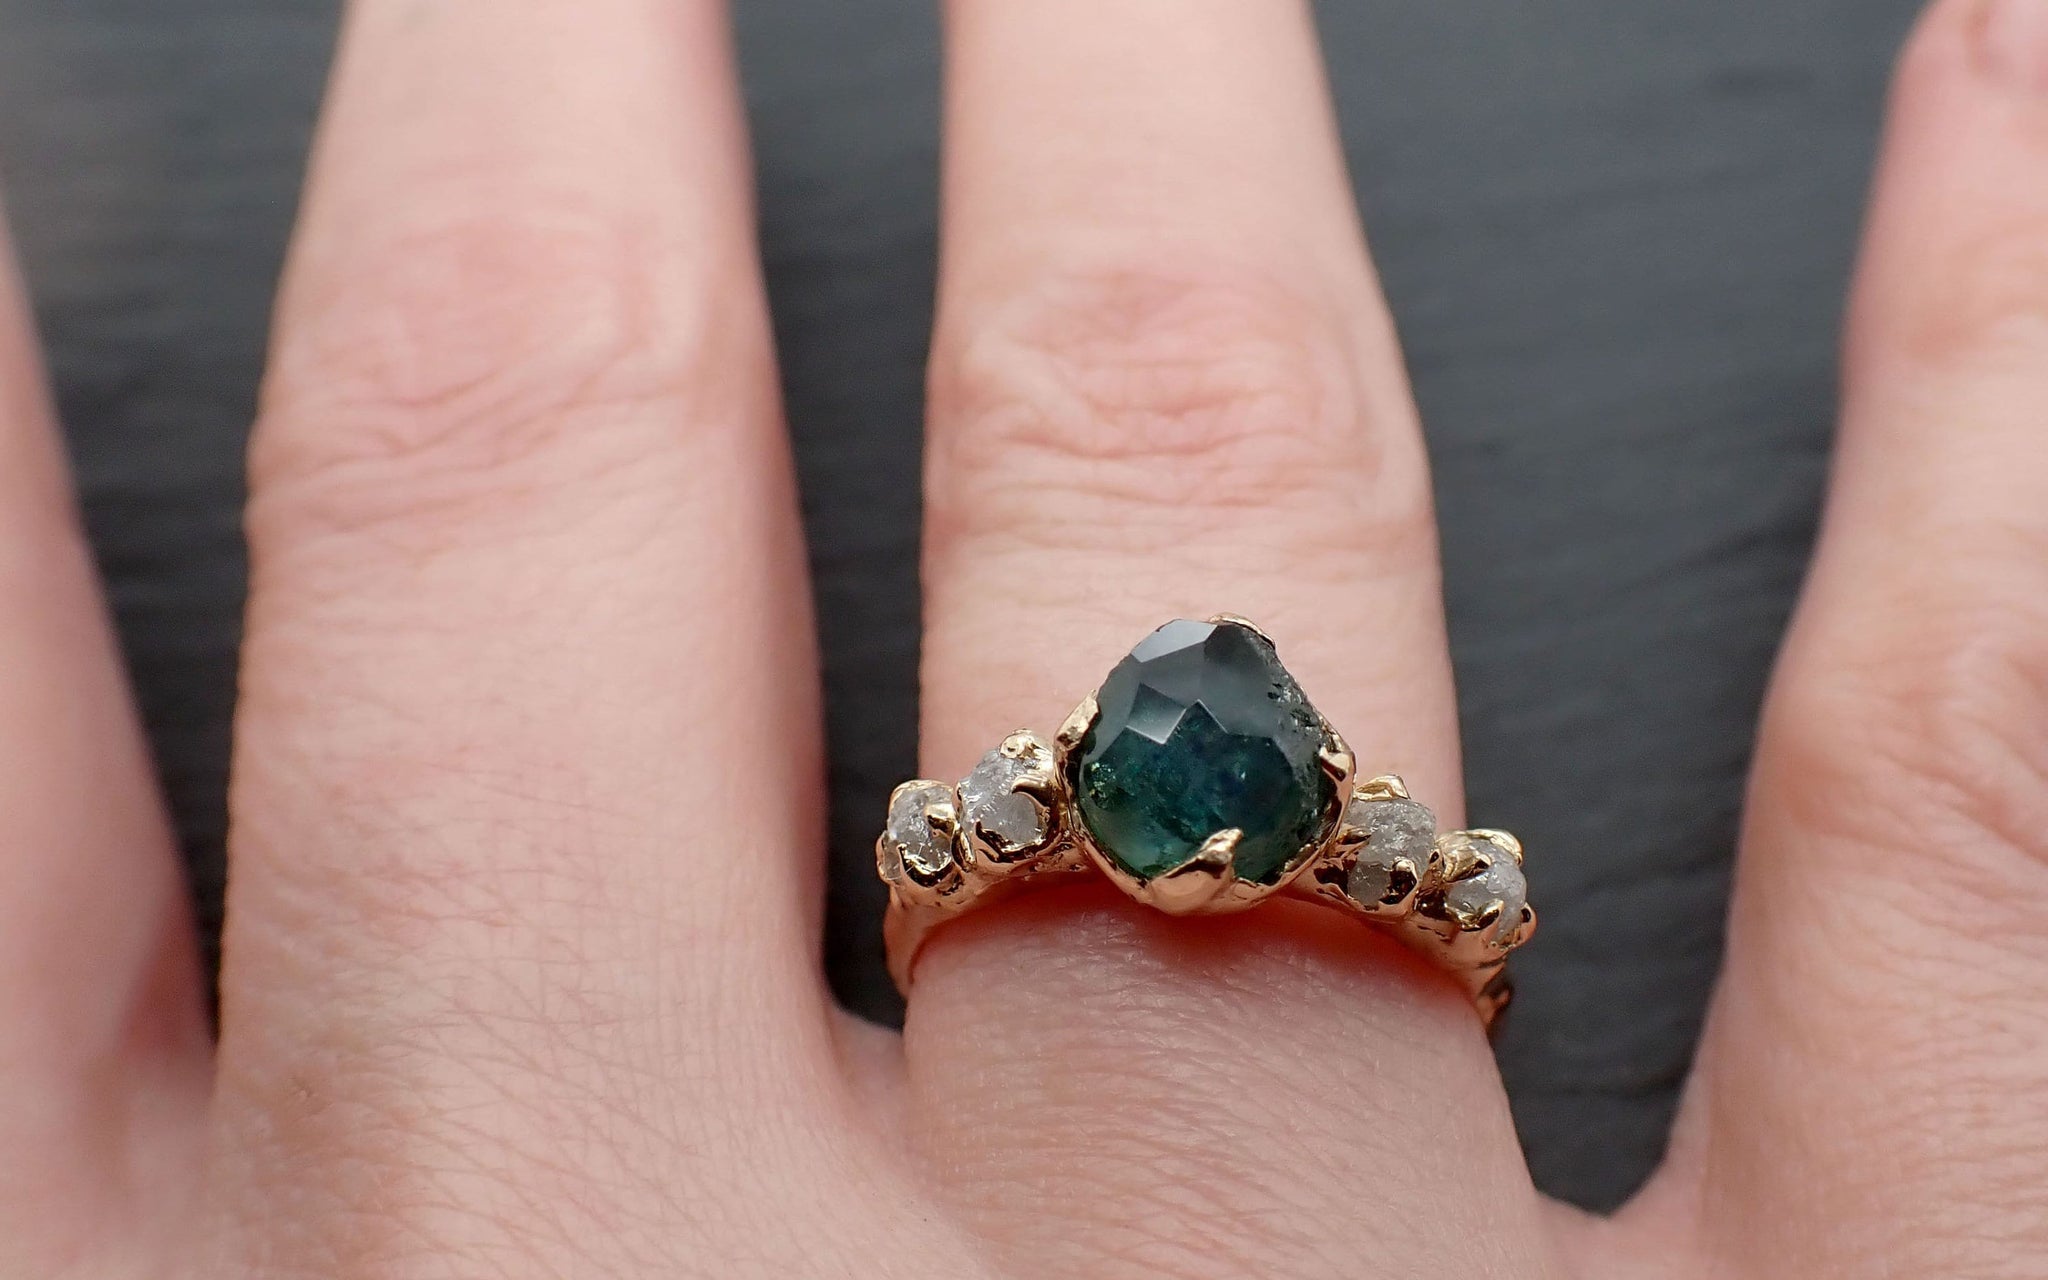 Partially faceted green Montana Sapphire and fancy Diamonds 14k Yellow Gold Engagement Wedding Ring Gemstone Ring Multi stone Ring 3405